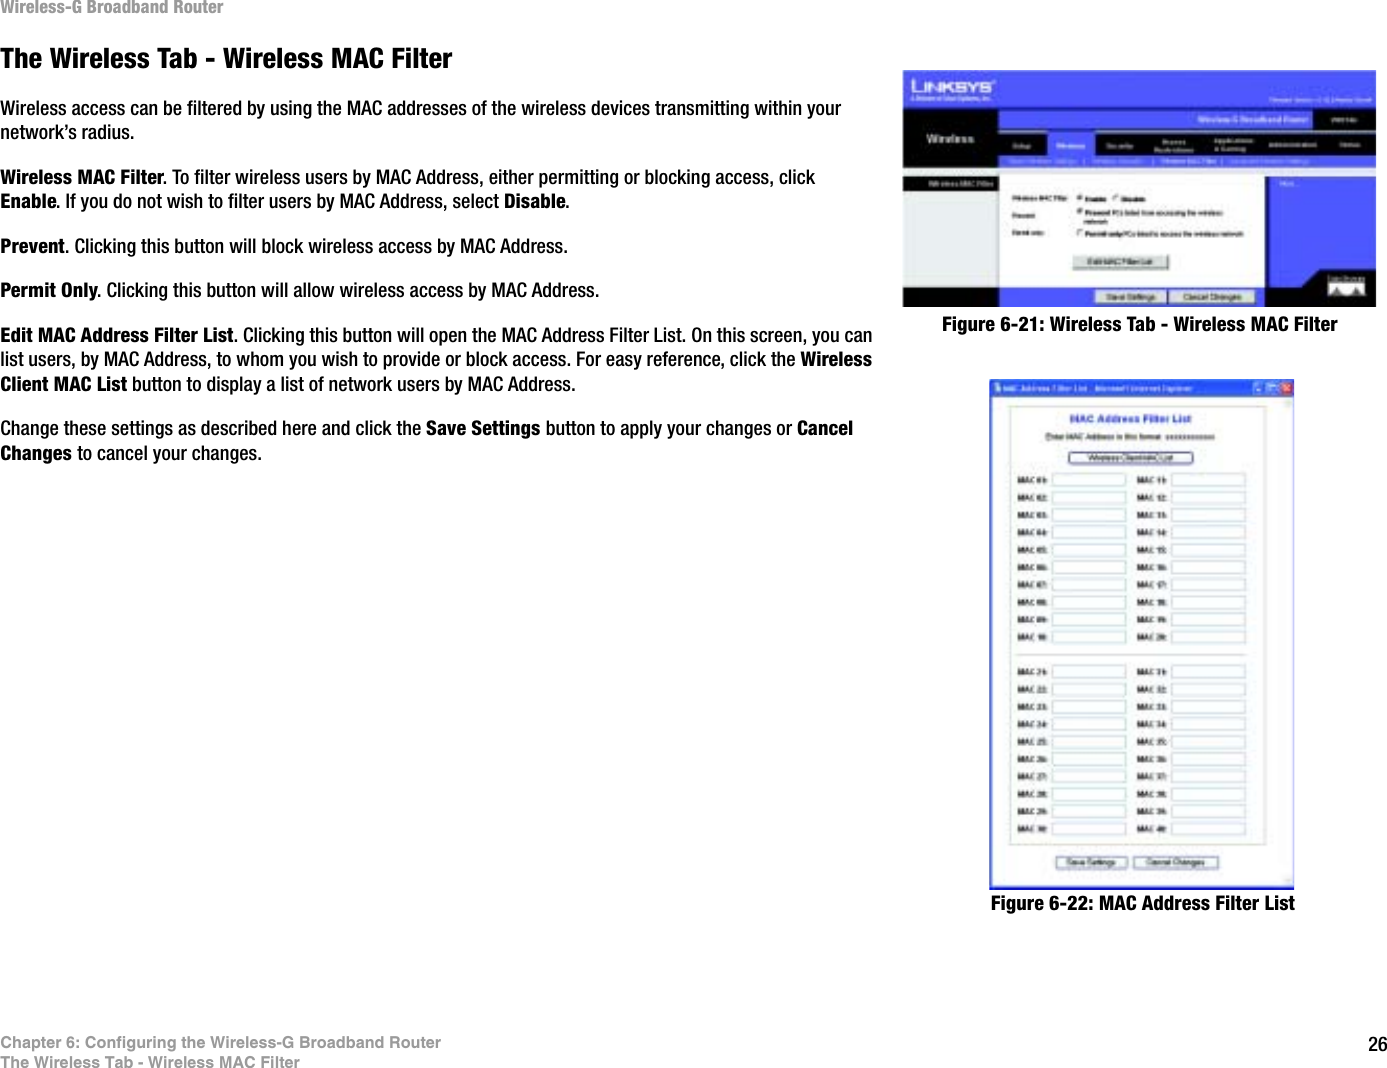 26Chapter 6: Configuring the Wireless-G Broadband RouterThe Wireless Tab - Wireless MAC FilterWireless-G Broadband RouterThe Wireless Tab - Wireless MAC FilterWireless access can be filtered by using the MAC addresses of the wireless devices transmitting within your network’s radius. Wireless MAC Filter. To filter wireless users by MAC Address, either permitting or blocking access, click Enable. If you do not wish to filter users by MAC Address, select Disable.Prevent. Clicking this button will block wireless access by MAC Address.Permit Only. Clicking this button will allow wireless access by MAC Address.Edit MAC Address Filter List. Clicking this button will open the MAC Address Filter List. On this screen, you can list users, by MAC Address, to whom you wish to provide or block access. For easy reference, click the Wireless Client MAC List button to display a list of network users by MAC Address.Change these settings as described here and click the Save Settings button to apply your changes or Cancel Changes to cancel your changes.Figure 6-22: MAC Address Filter ListFigure 6-21: Wireless Tab - Wireless MAC Filter